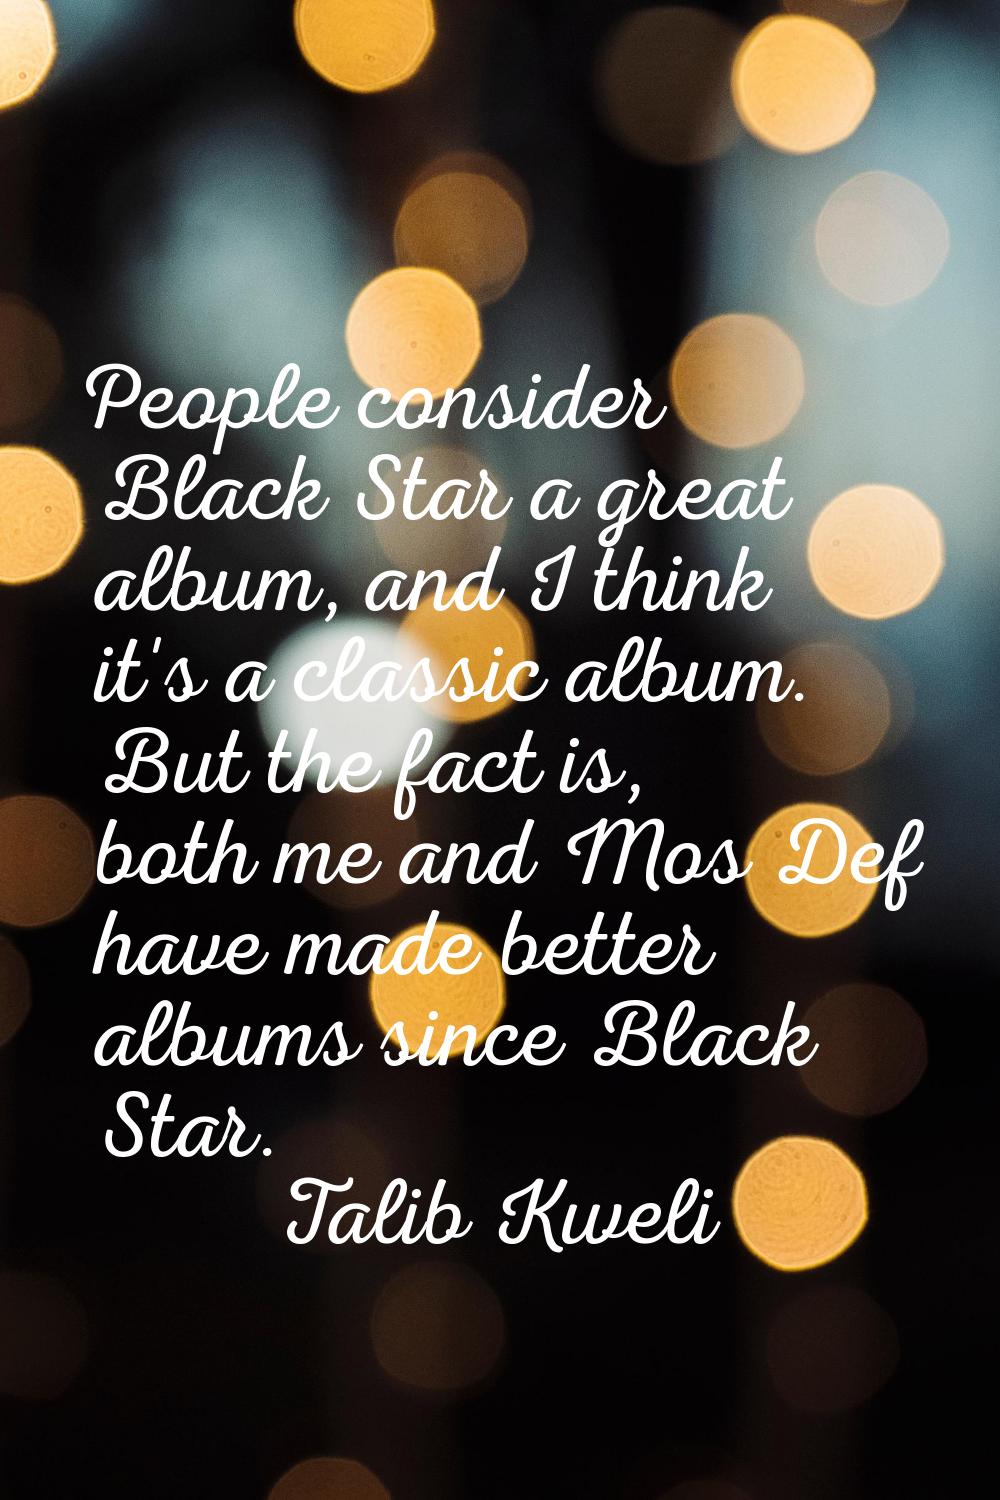 People consider Black Star a great album, and I think it's a classic album. But the fact is, both m